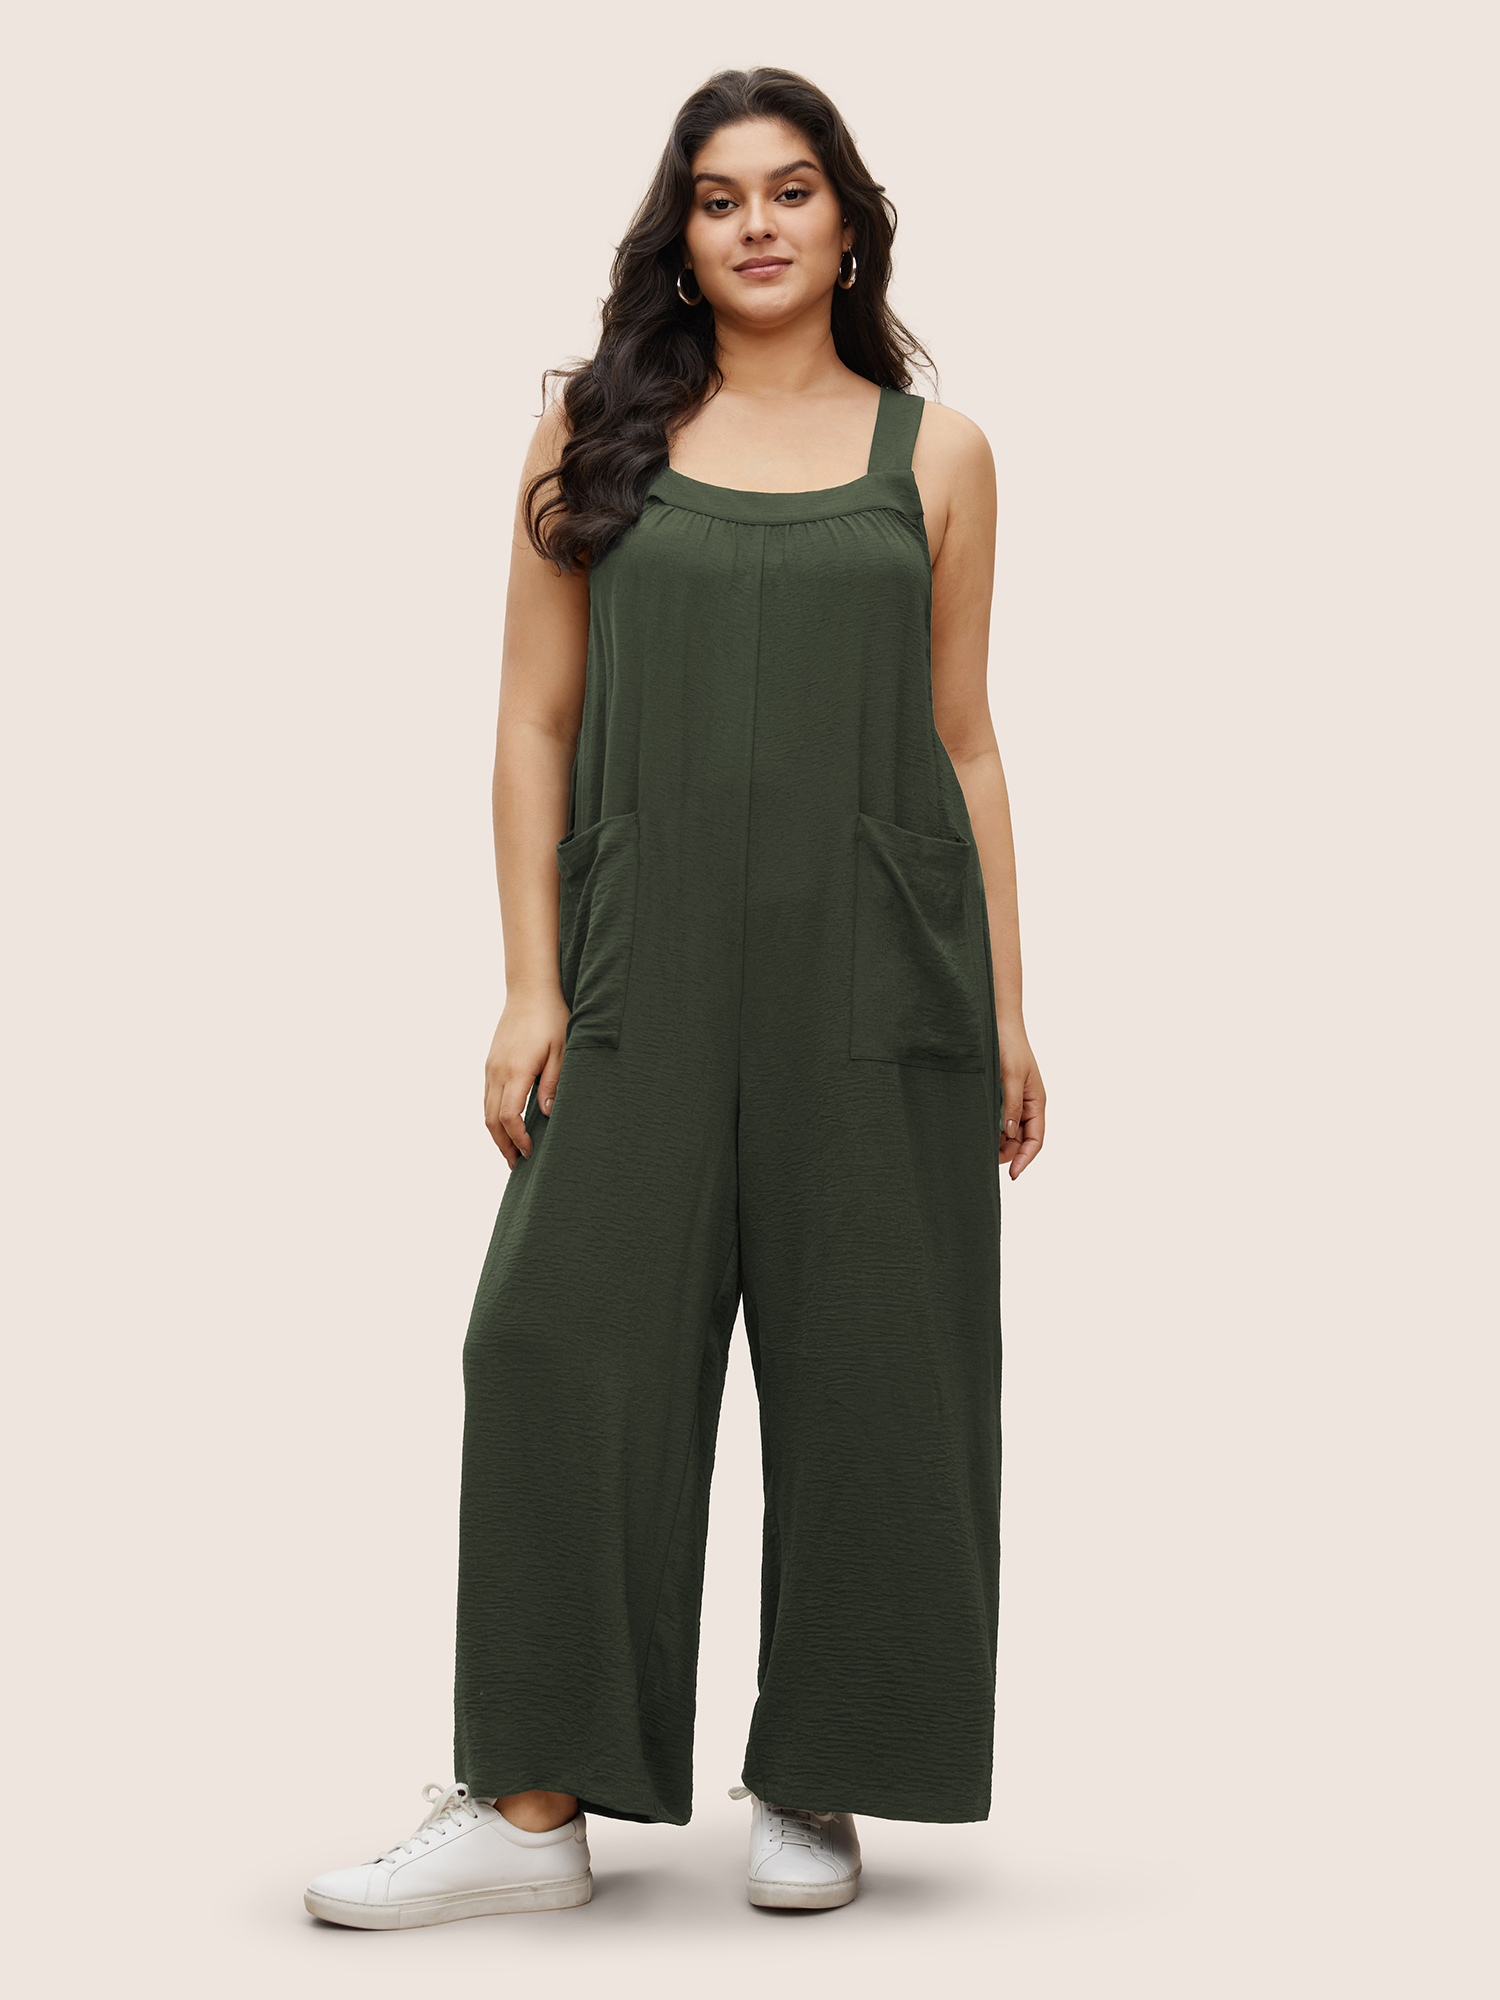 

Plus Size ArmyGreen Plain Pleated Wide Leg Jumpsuit Women Casual Sleeveless Square Neck Everyday Loose Jumpsuits BloomChic